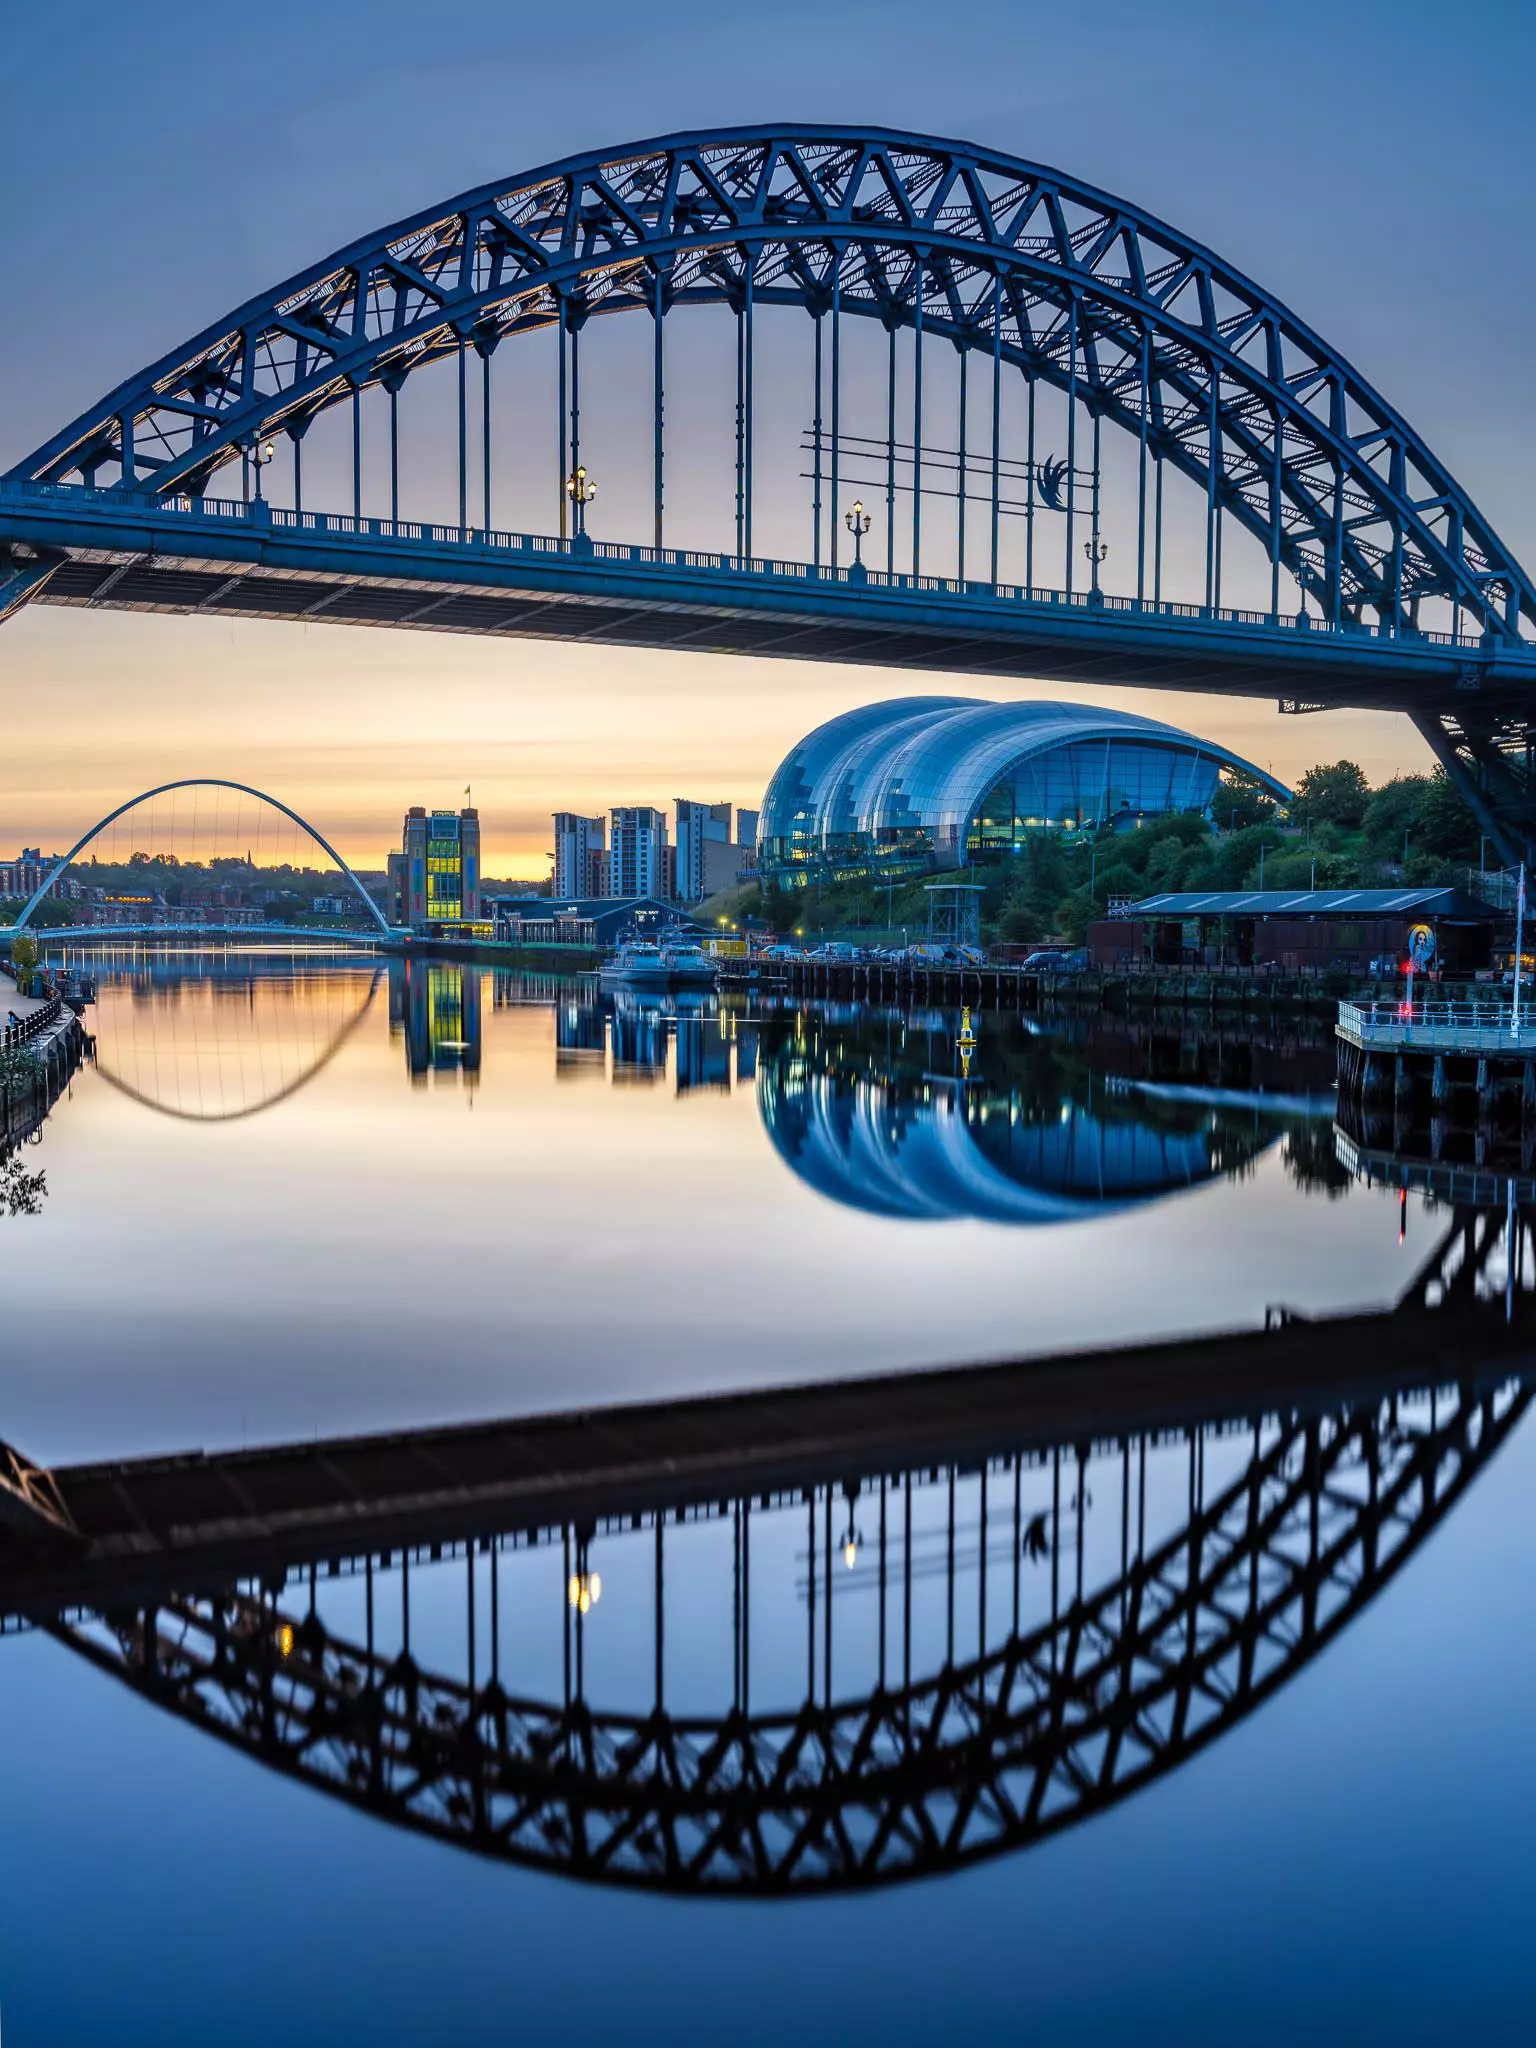 Reflections of The Tyne Bridge at dawn by https://www.jasonrowphotography.co.uk
